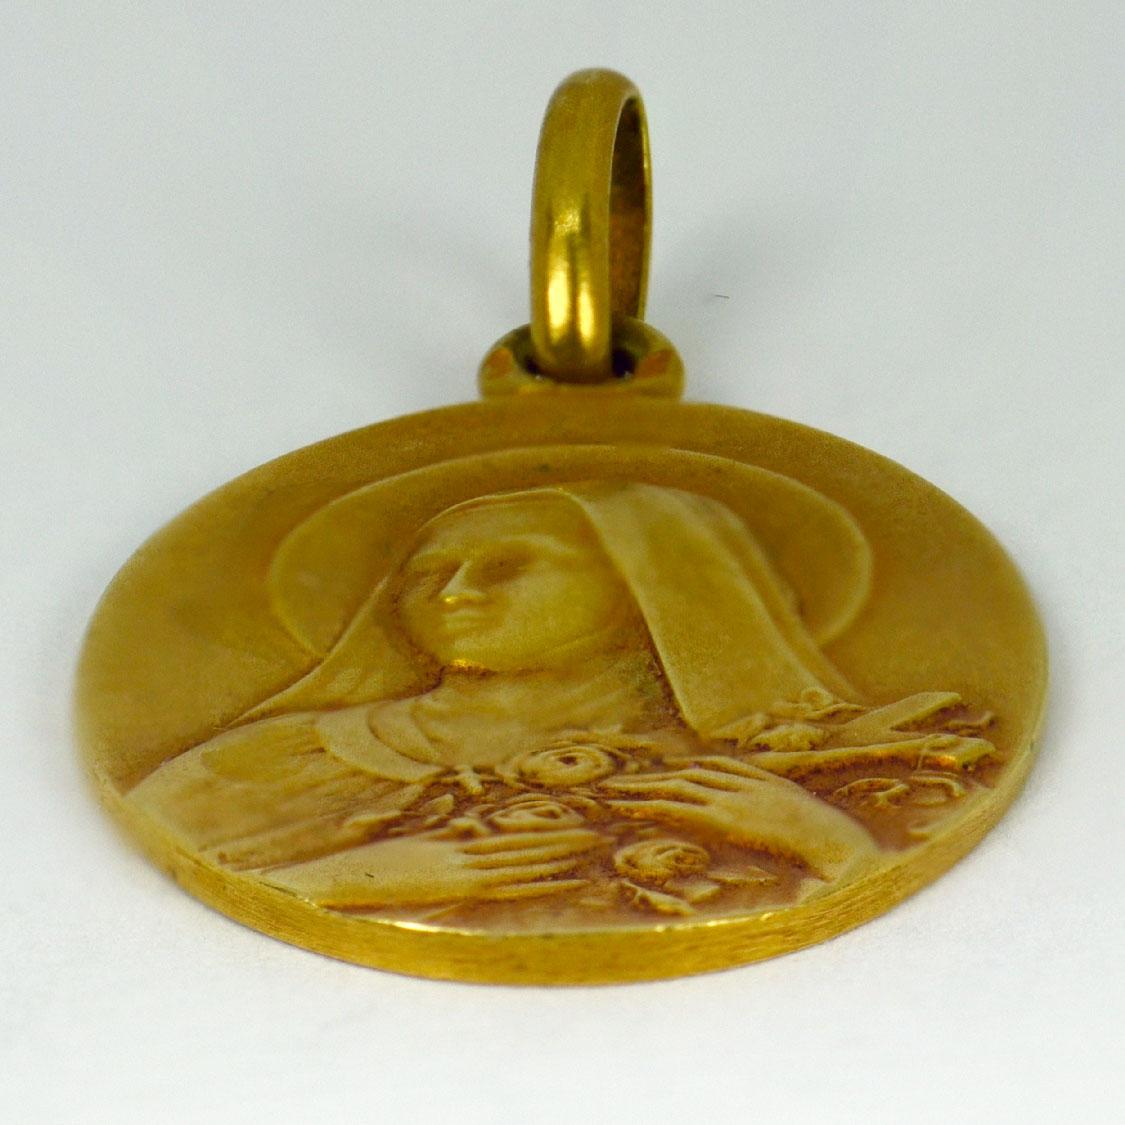 A French 18 karat (18K) yellow gold charm pendant designed as an oval medal depicting St Therese holding a crucifix within a sheaf of roses. Stamped with the eagles head for French manufacture and 18 karat gold with an unknown maker’s